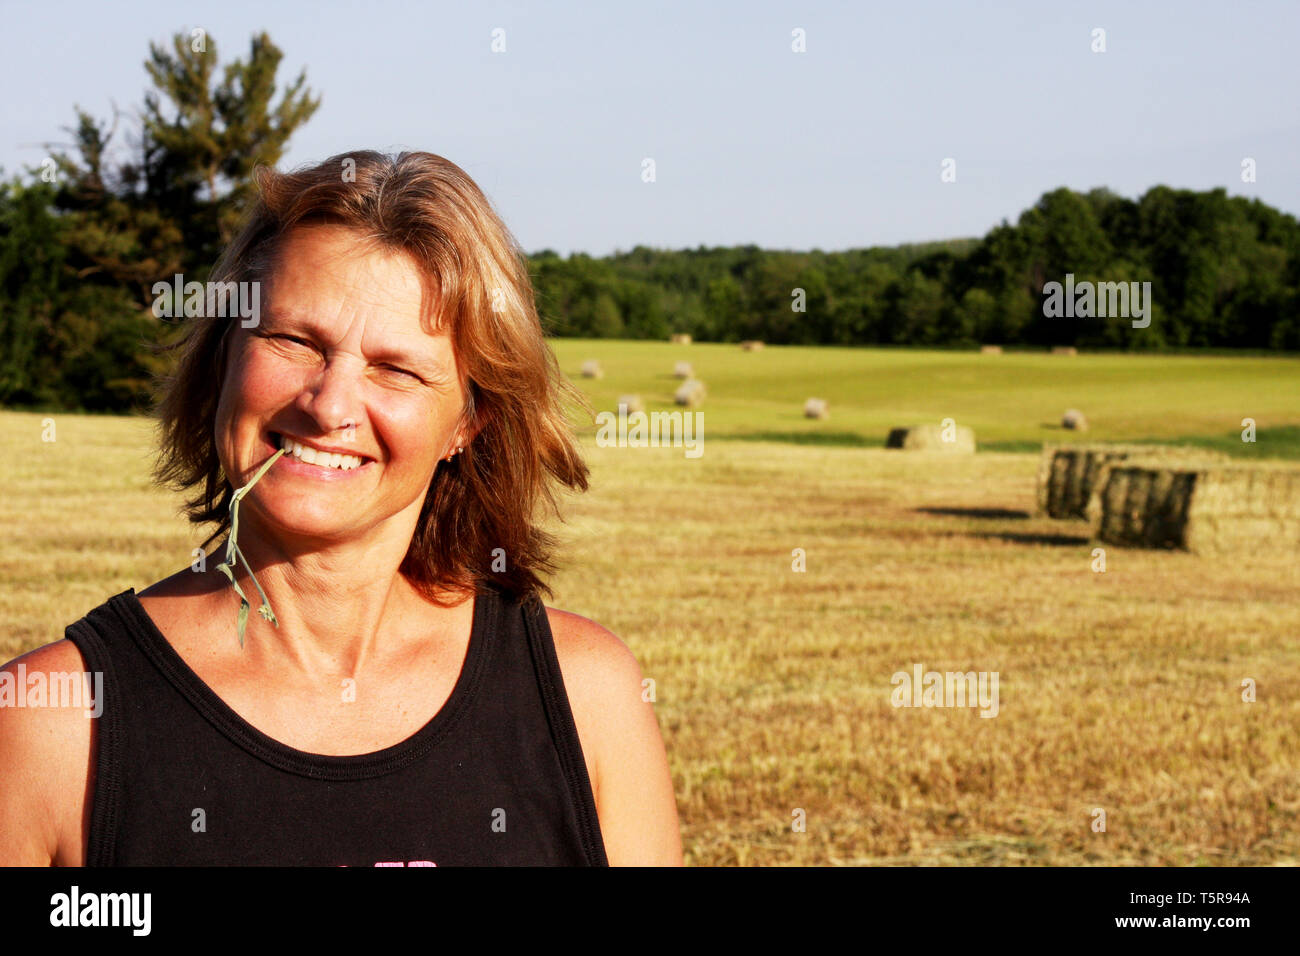 Woman farmer on a Hay Field with bales in the background Stock Photo